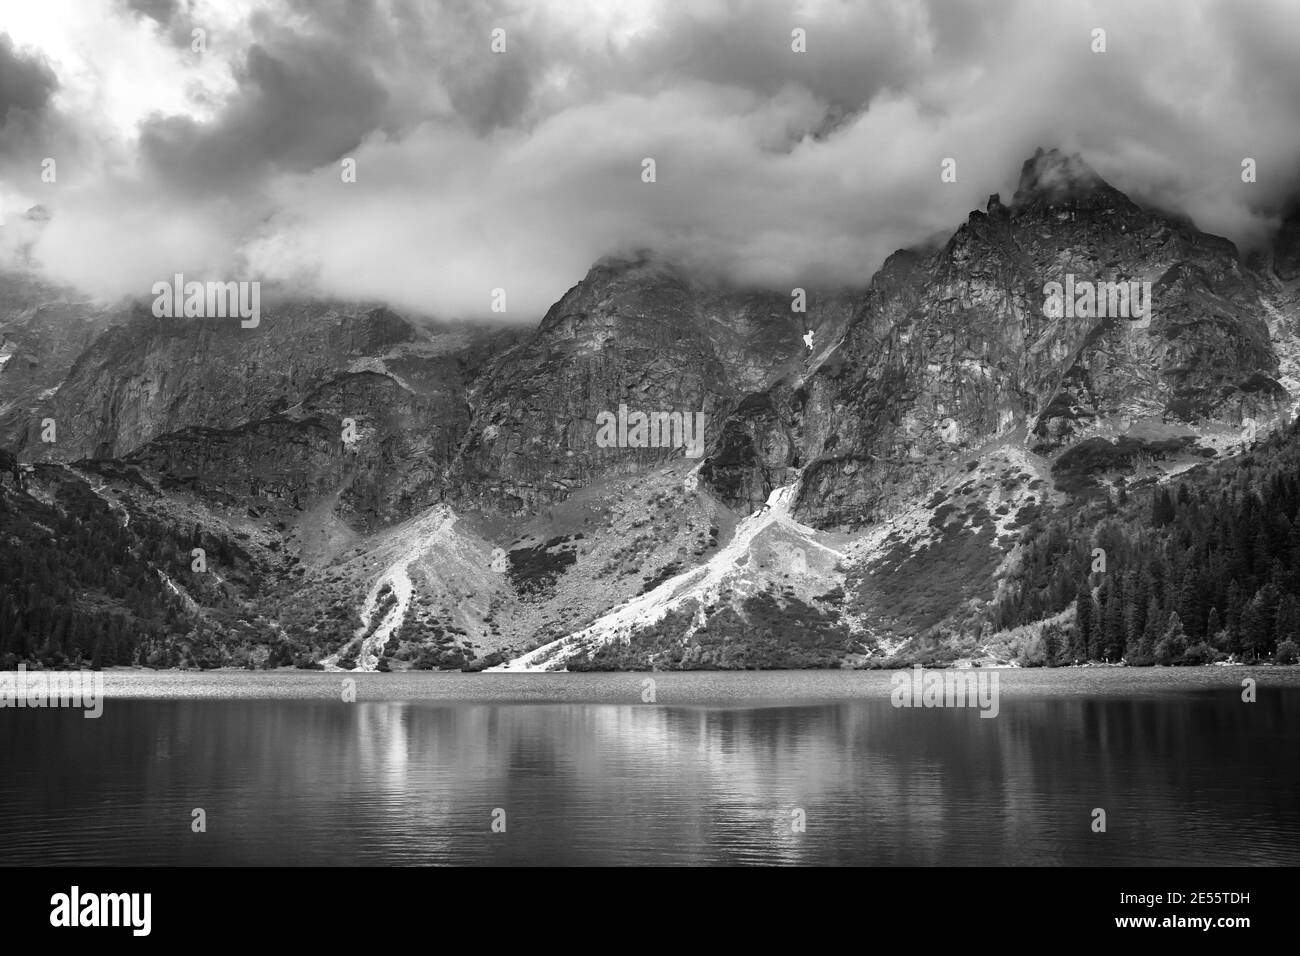 Black and white storm cloudy over Morskie Oko lake reflected in the water. Tatra Mountains, Poland Stock Photo